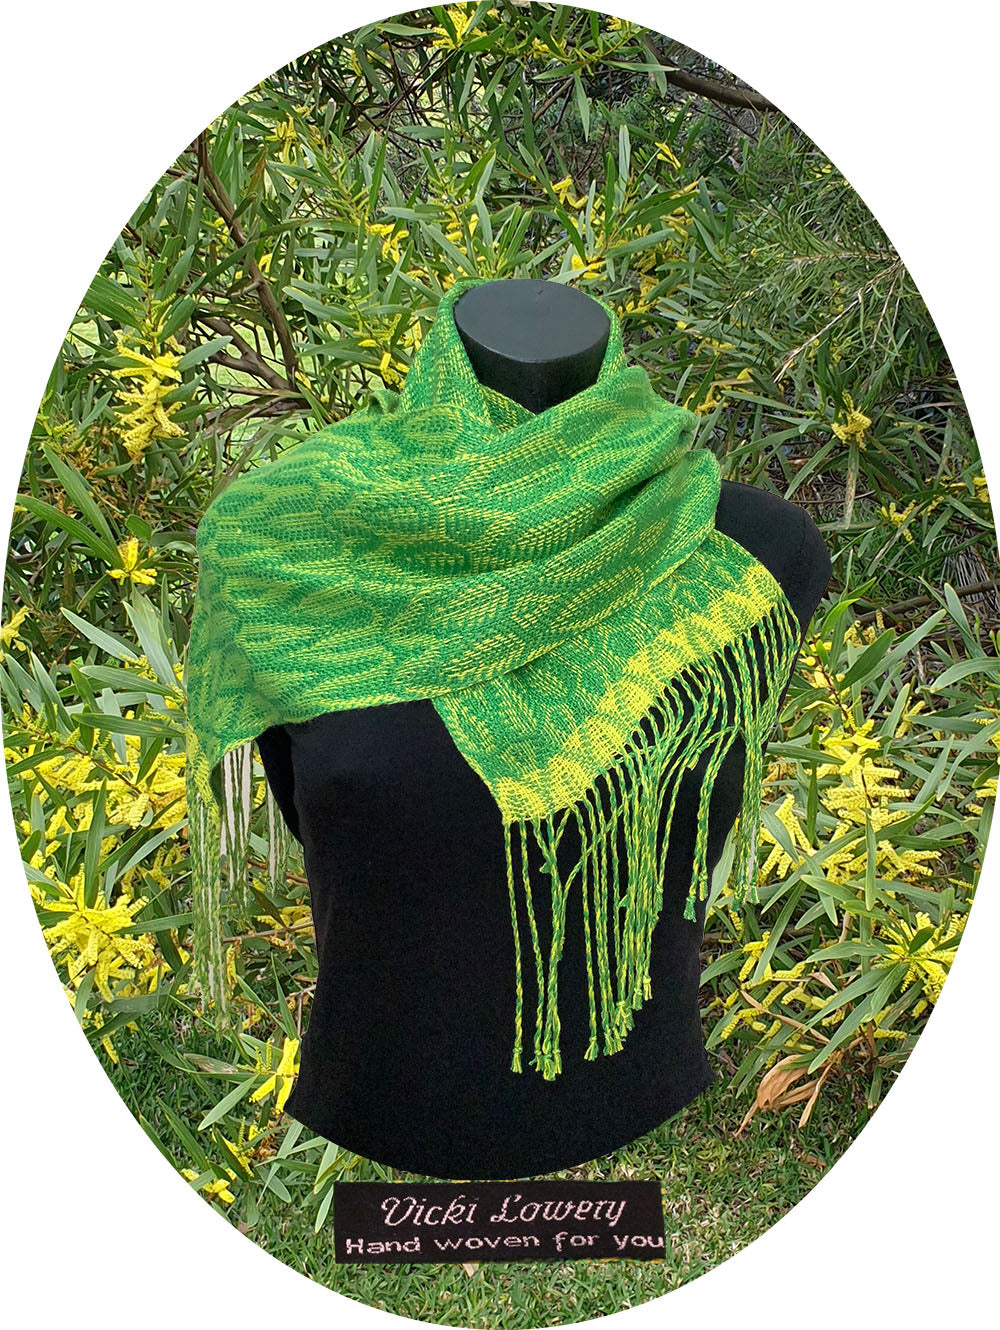 Silk scarf handwoven by Vicki Lowery